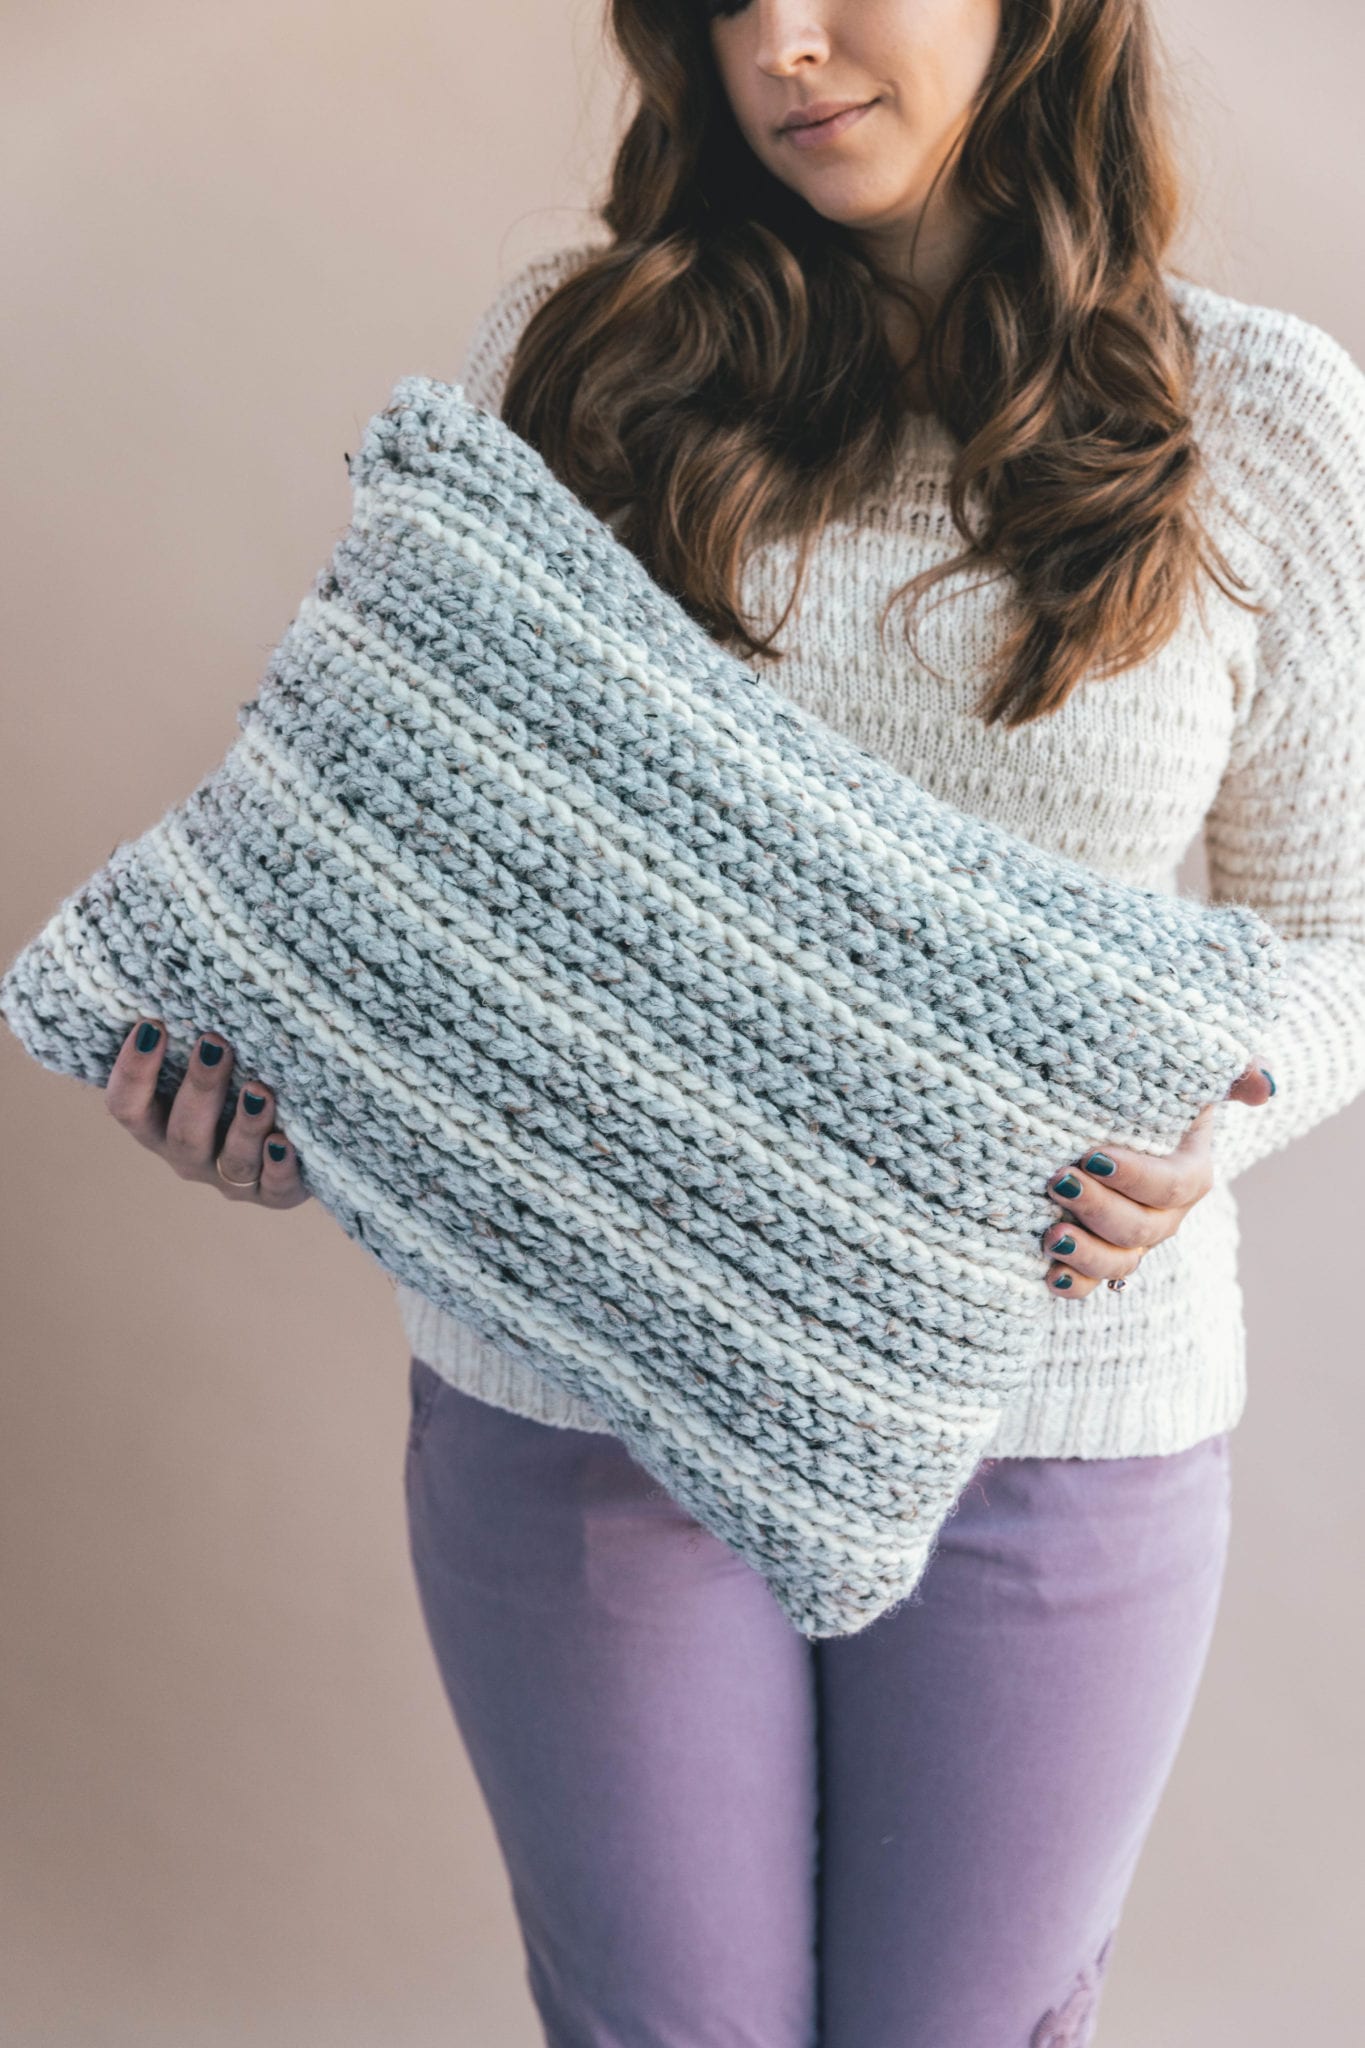 Knit Look Pillow held by a woman